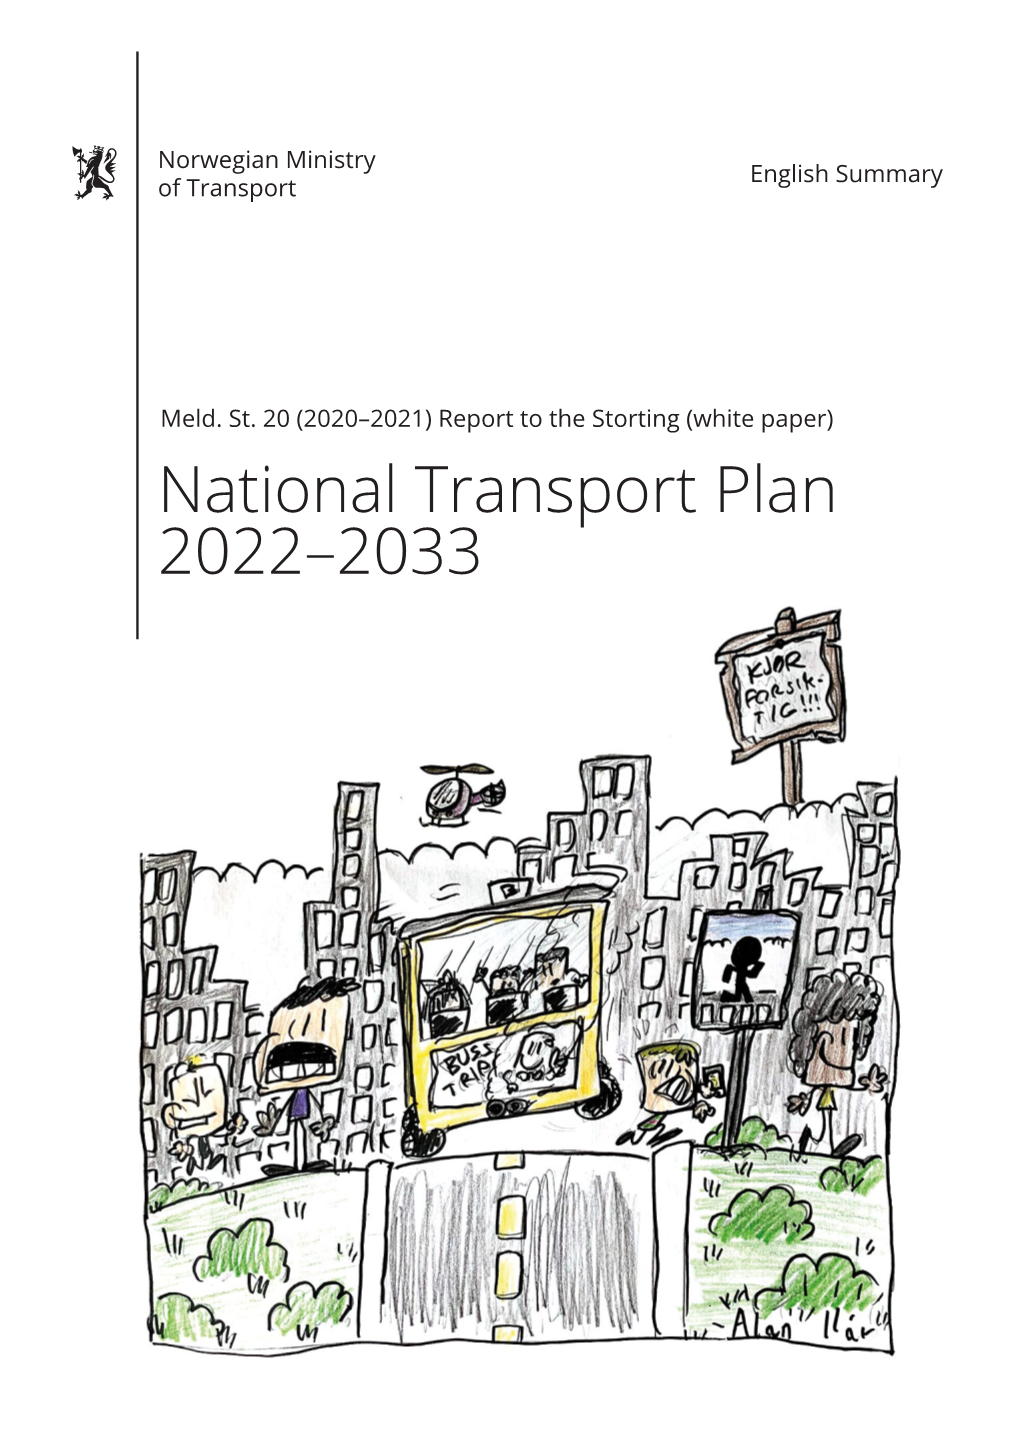 Meld. St. 20 (2020–2021) Report to the Storting (White Paper) National Transport Plan 2022–2033